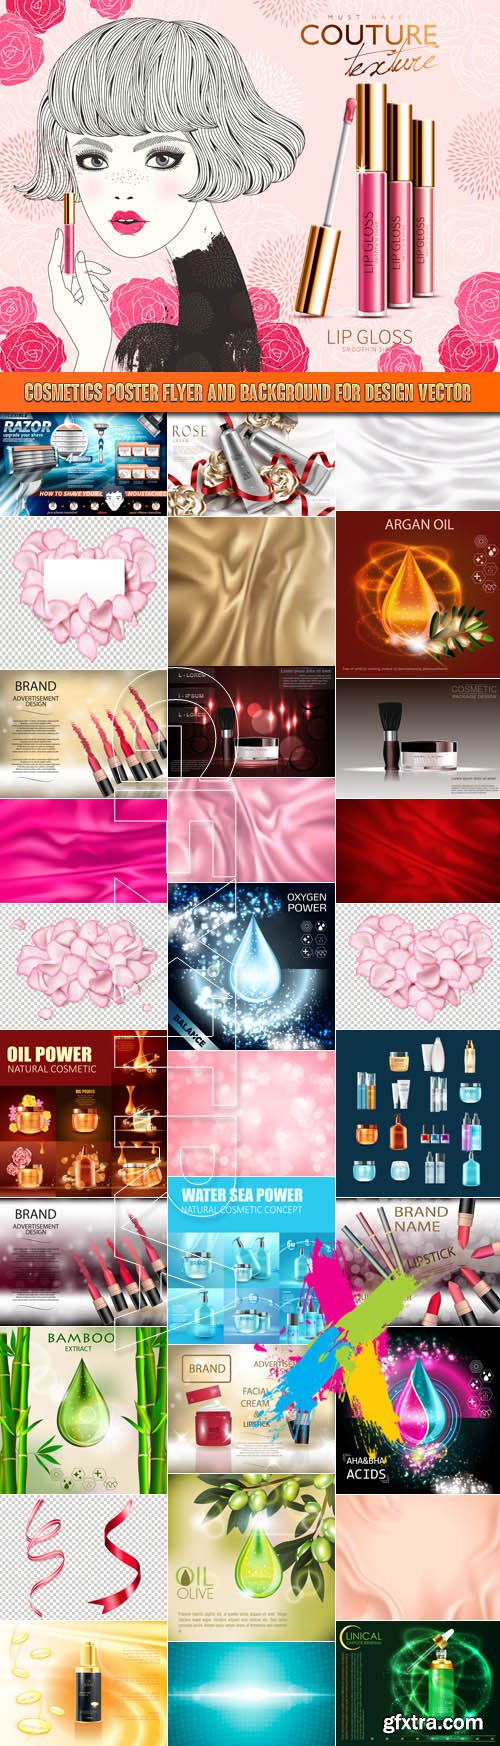 Cosmetics poster flyer and background for design vector